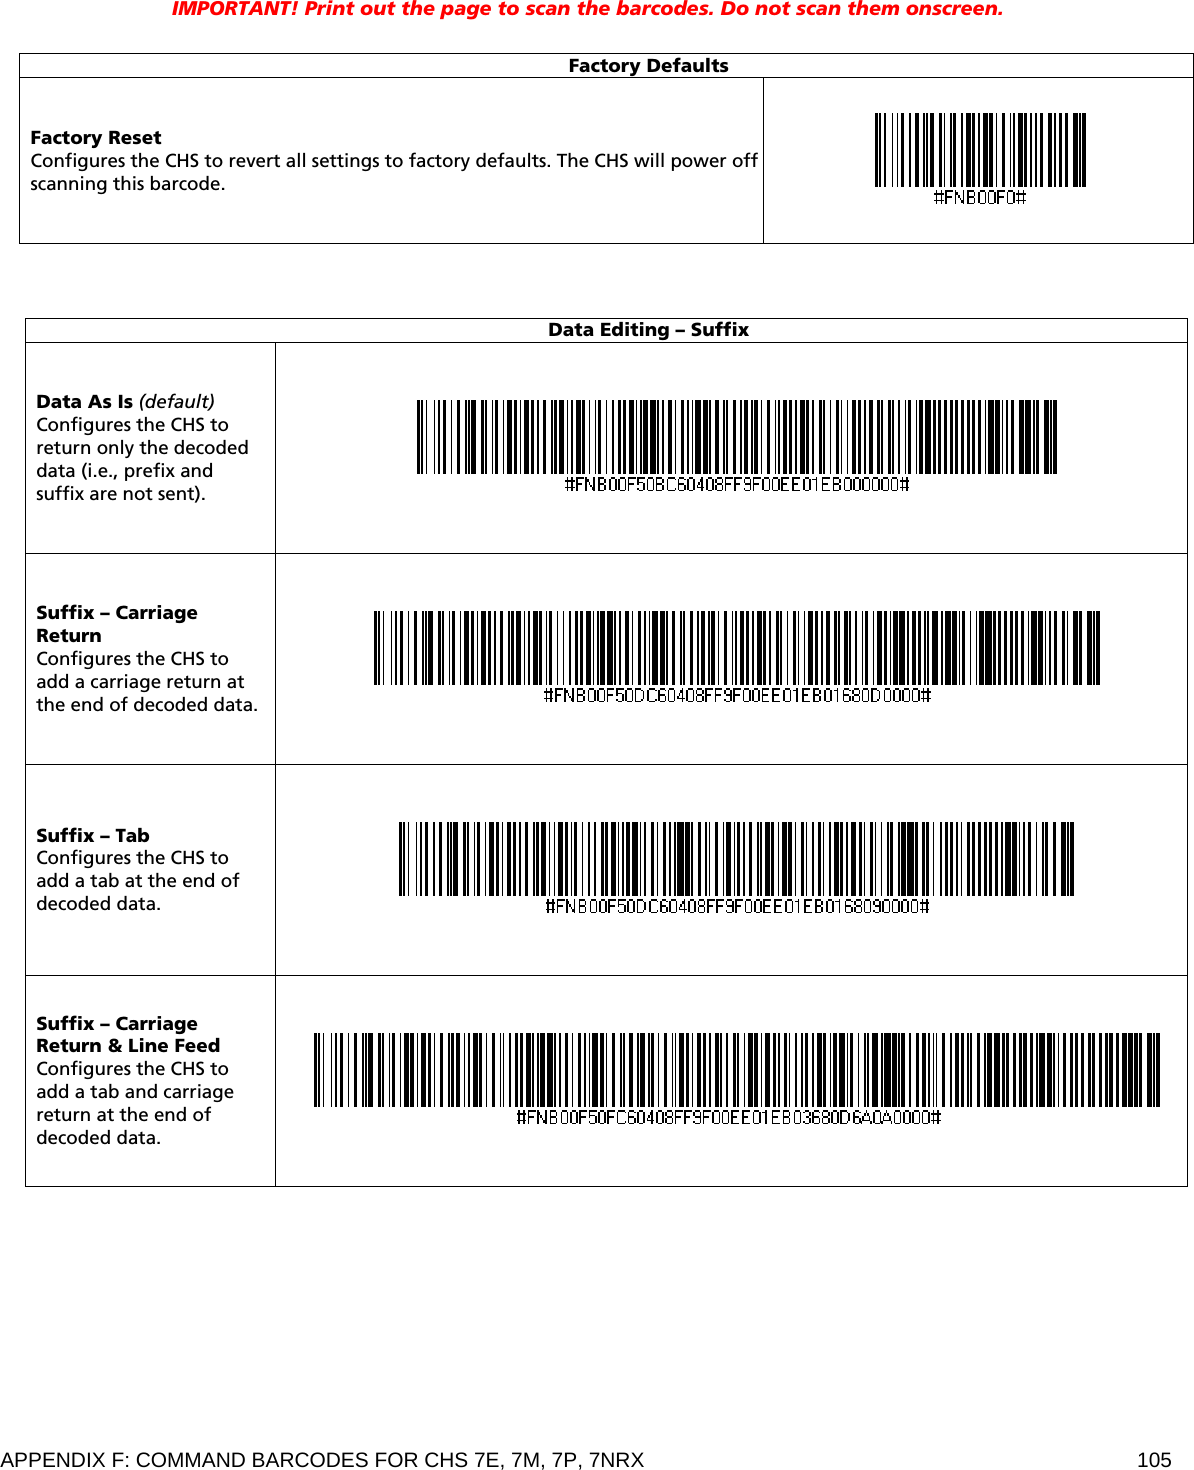 APPENDIX F: COMMAND BARCODES FOR CHS 7E, 7M, 7P, 7NRX  105 IMPORTANT! Print out the page to scan the barcodes. Do not scan them onscreen.   Factory Defaults Factory Reset Configures the CHS to revert all settings to factory defaults. The CHS will power off scanning this barcode.     Data Editing – Suffix Data As Is (default) Configures the CHS to return only the decoded data (i.e., prefix and suffix are not sent).   Suffix – Carriage Return Configures the CHS to add a carriage return at the end of decoded data.  Suffix – Tab Configures the CHS to add a tab at the end of decoded data.   Suffix – Carriage Return &amp; Line Feed Configures the CHS to add a tab and carriage return at the end of decoded data.    